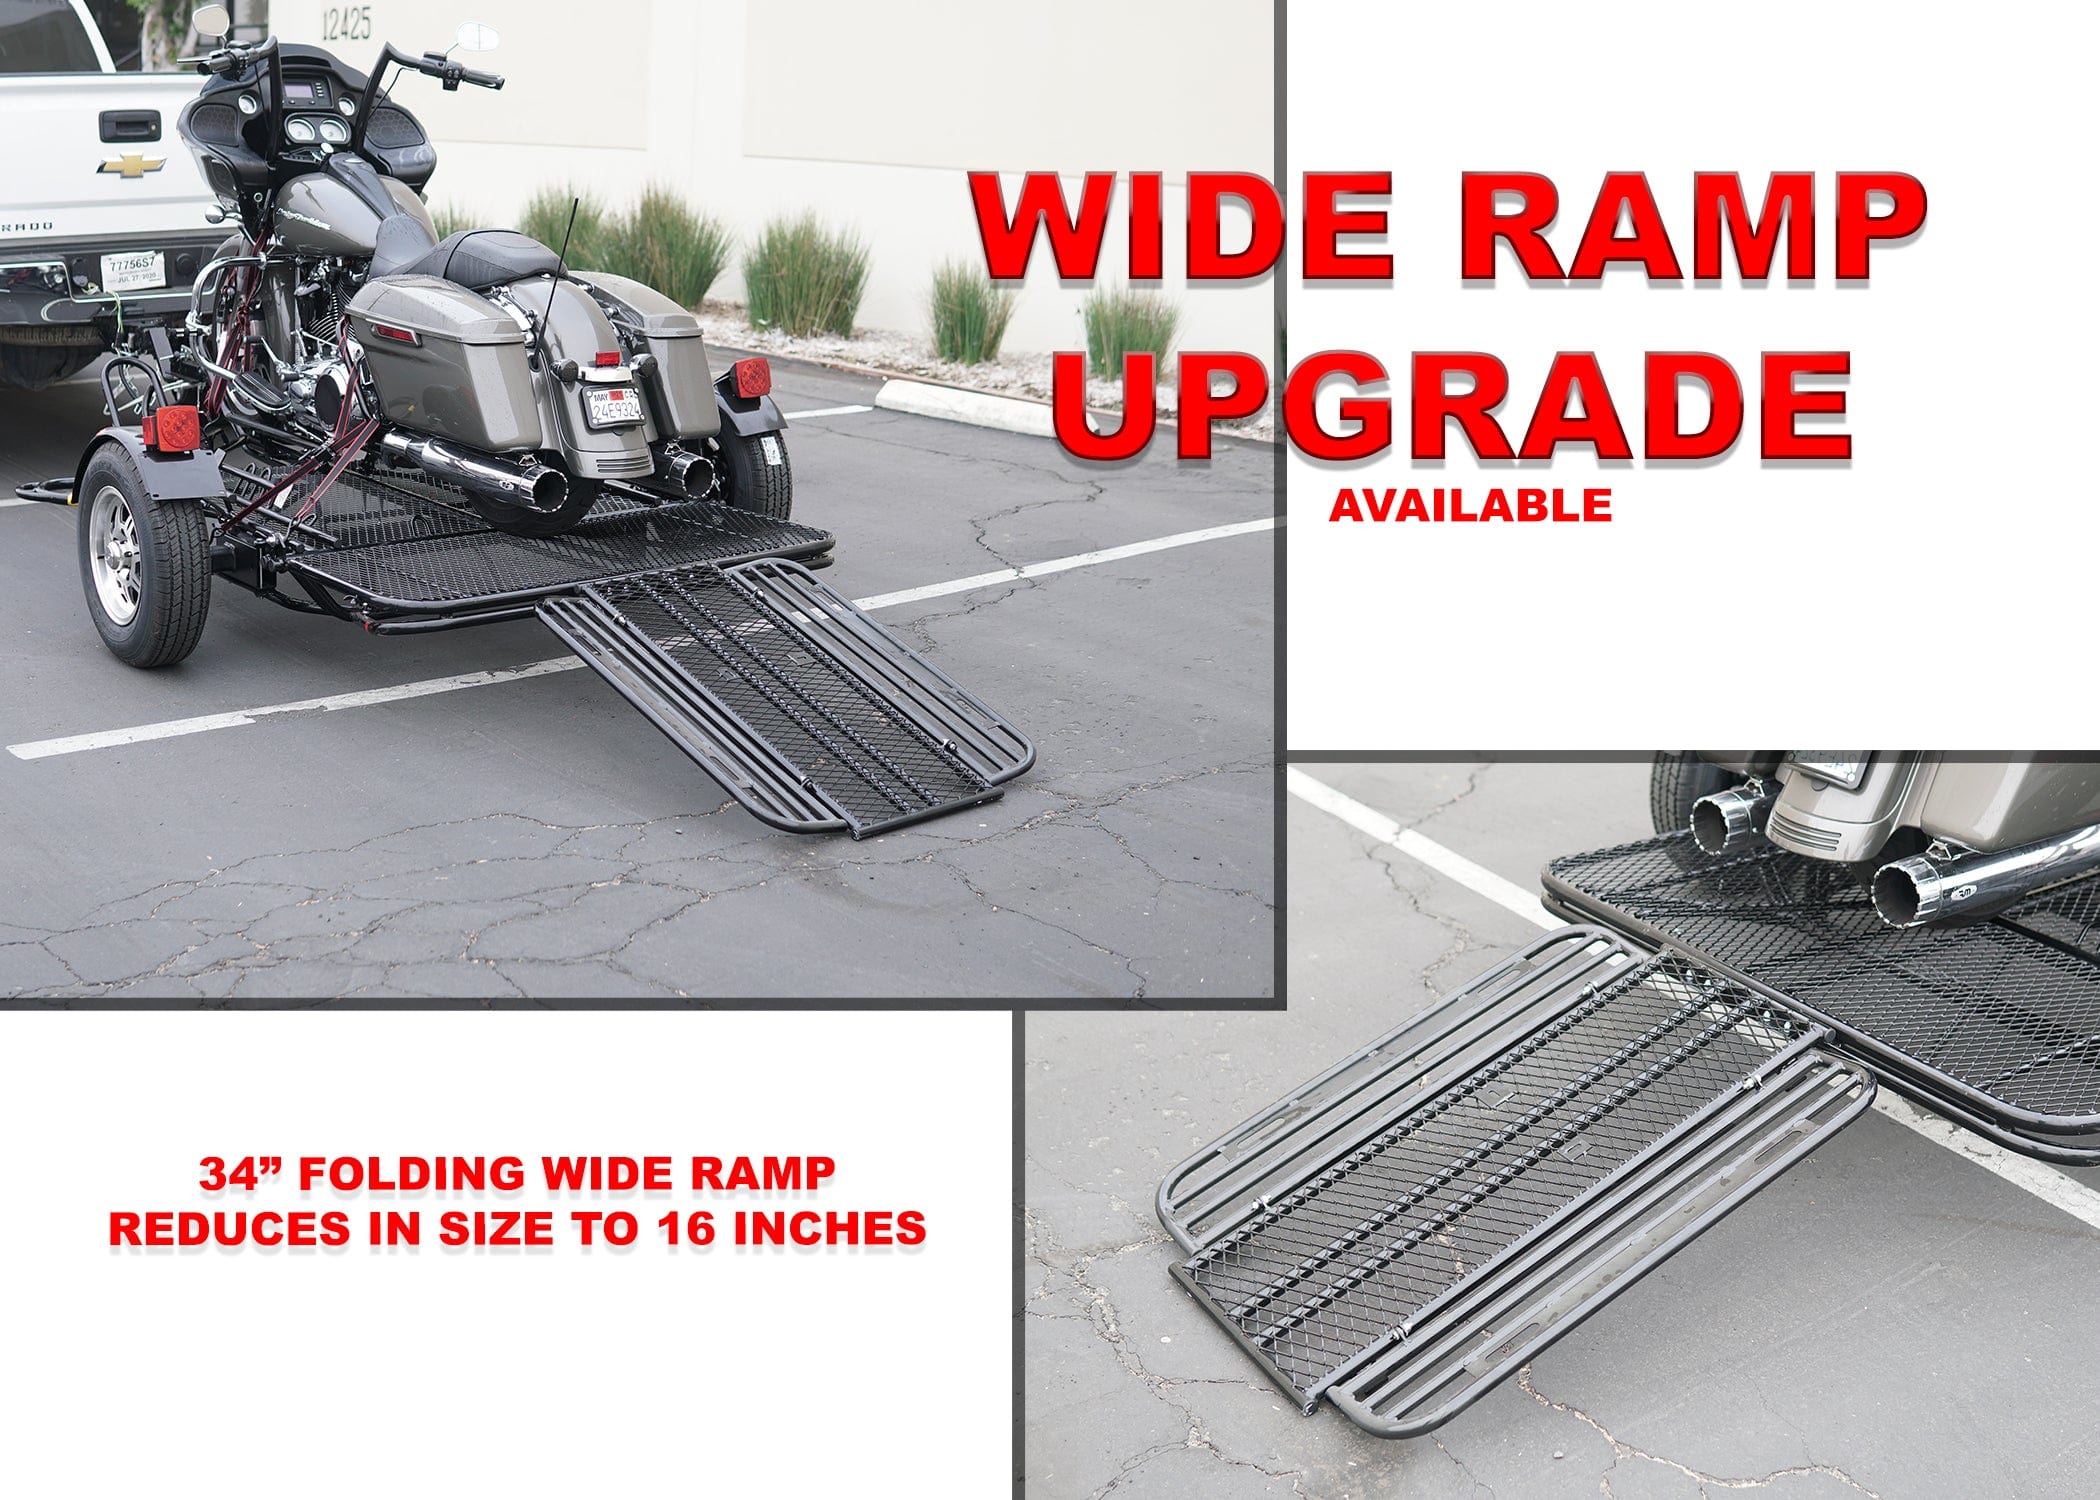 Kendon wide ramp ride up ramp upgrade from tow smart trailers